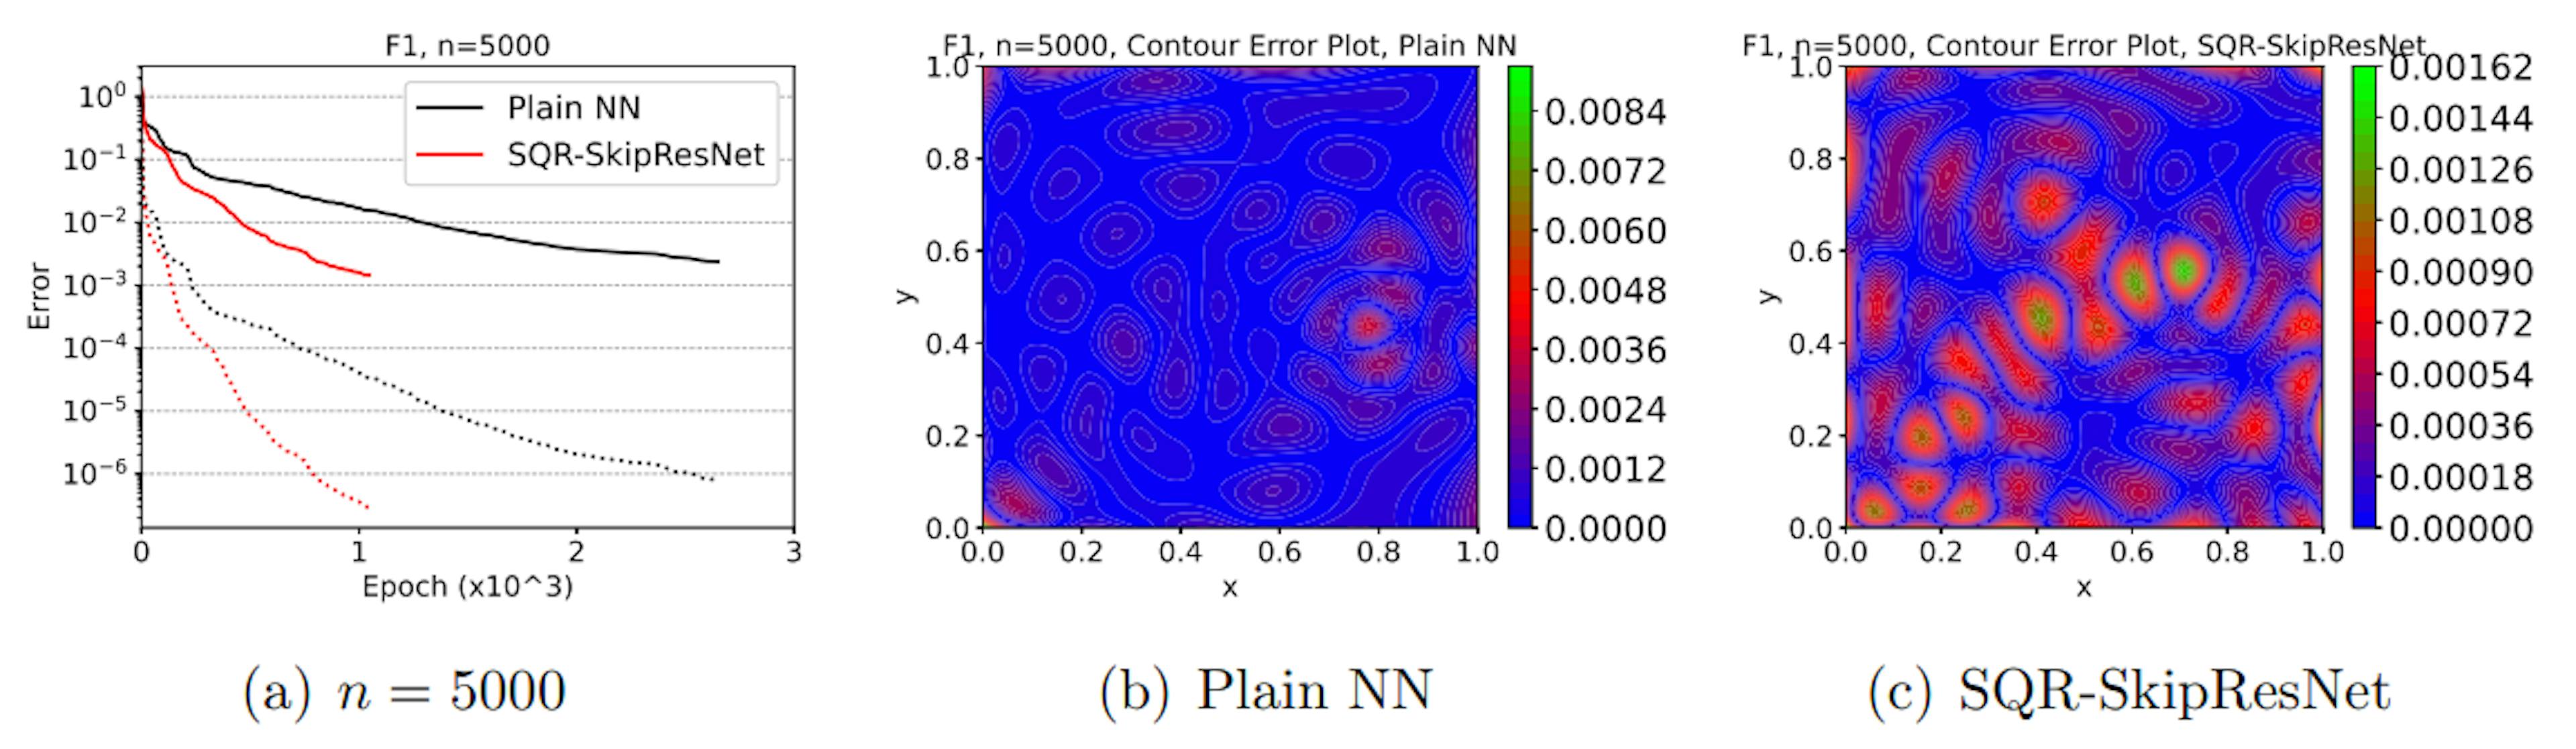 Figure 5: Example 1: The profiles of (a) training and validation results on F1 with 5000 data points. Dotted-line curves denote training error, and solid-line curves denote validation error. The corresponding contour error plots for (b) the plain NN and (c) SQR-SkipResNet.